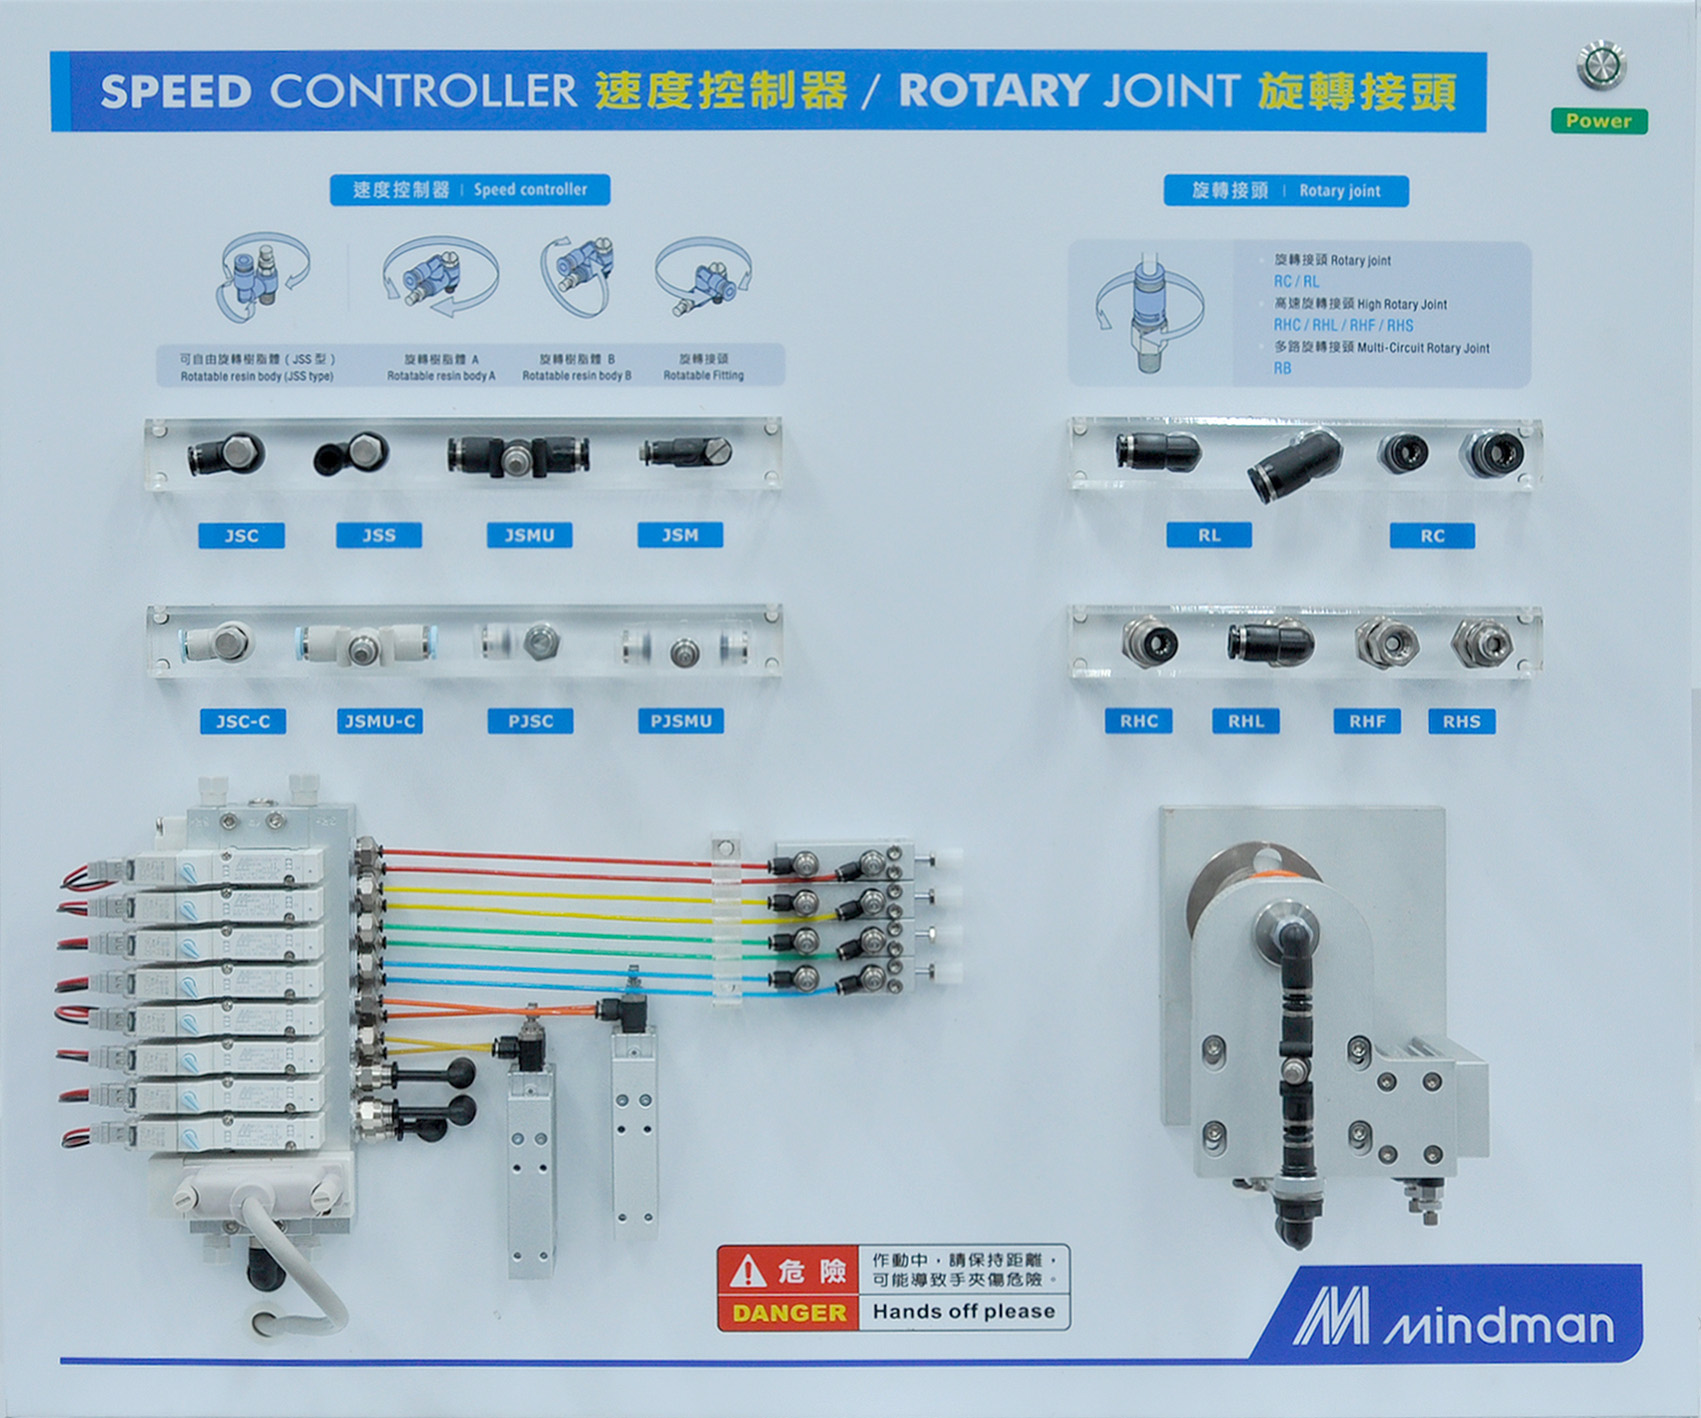 High quality speed controller for rotary points.